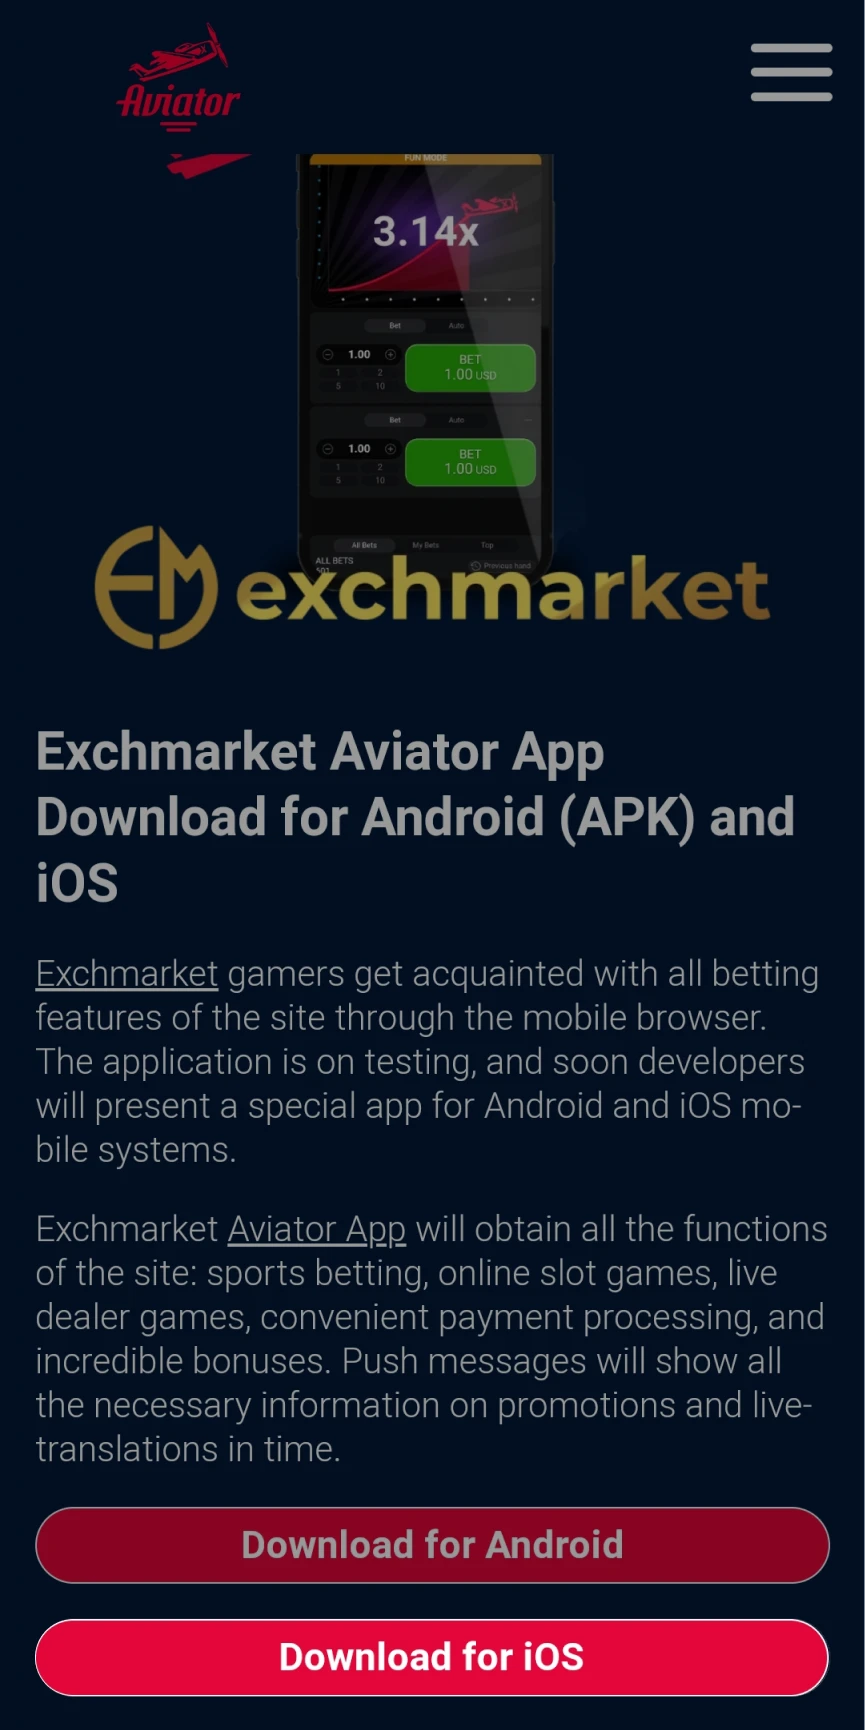 Go to the Exchmarket download page for iOS.